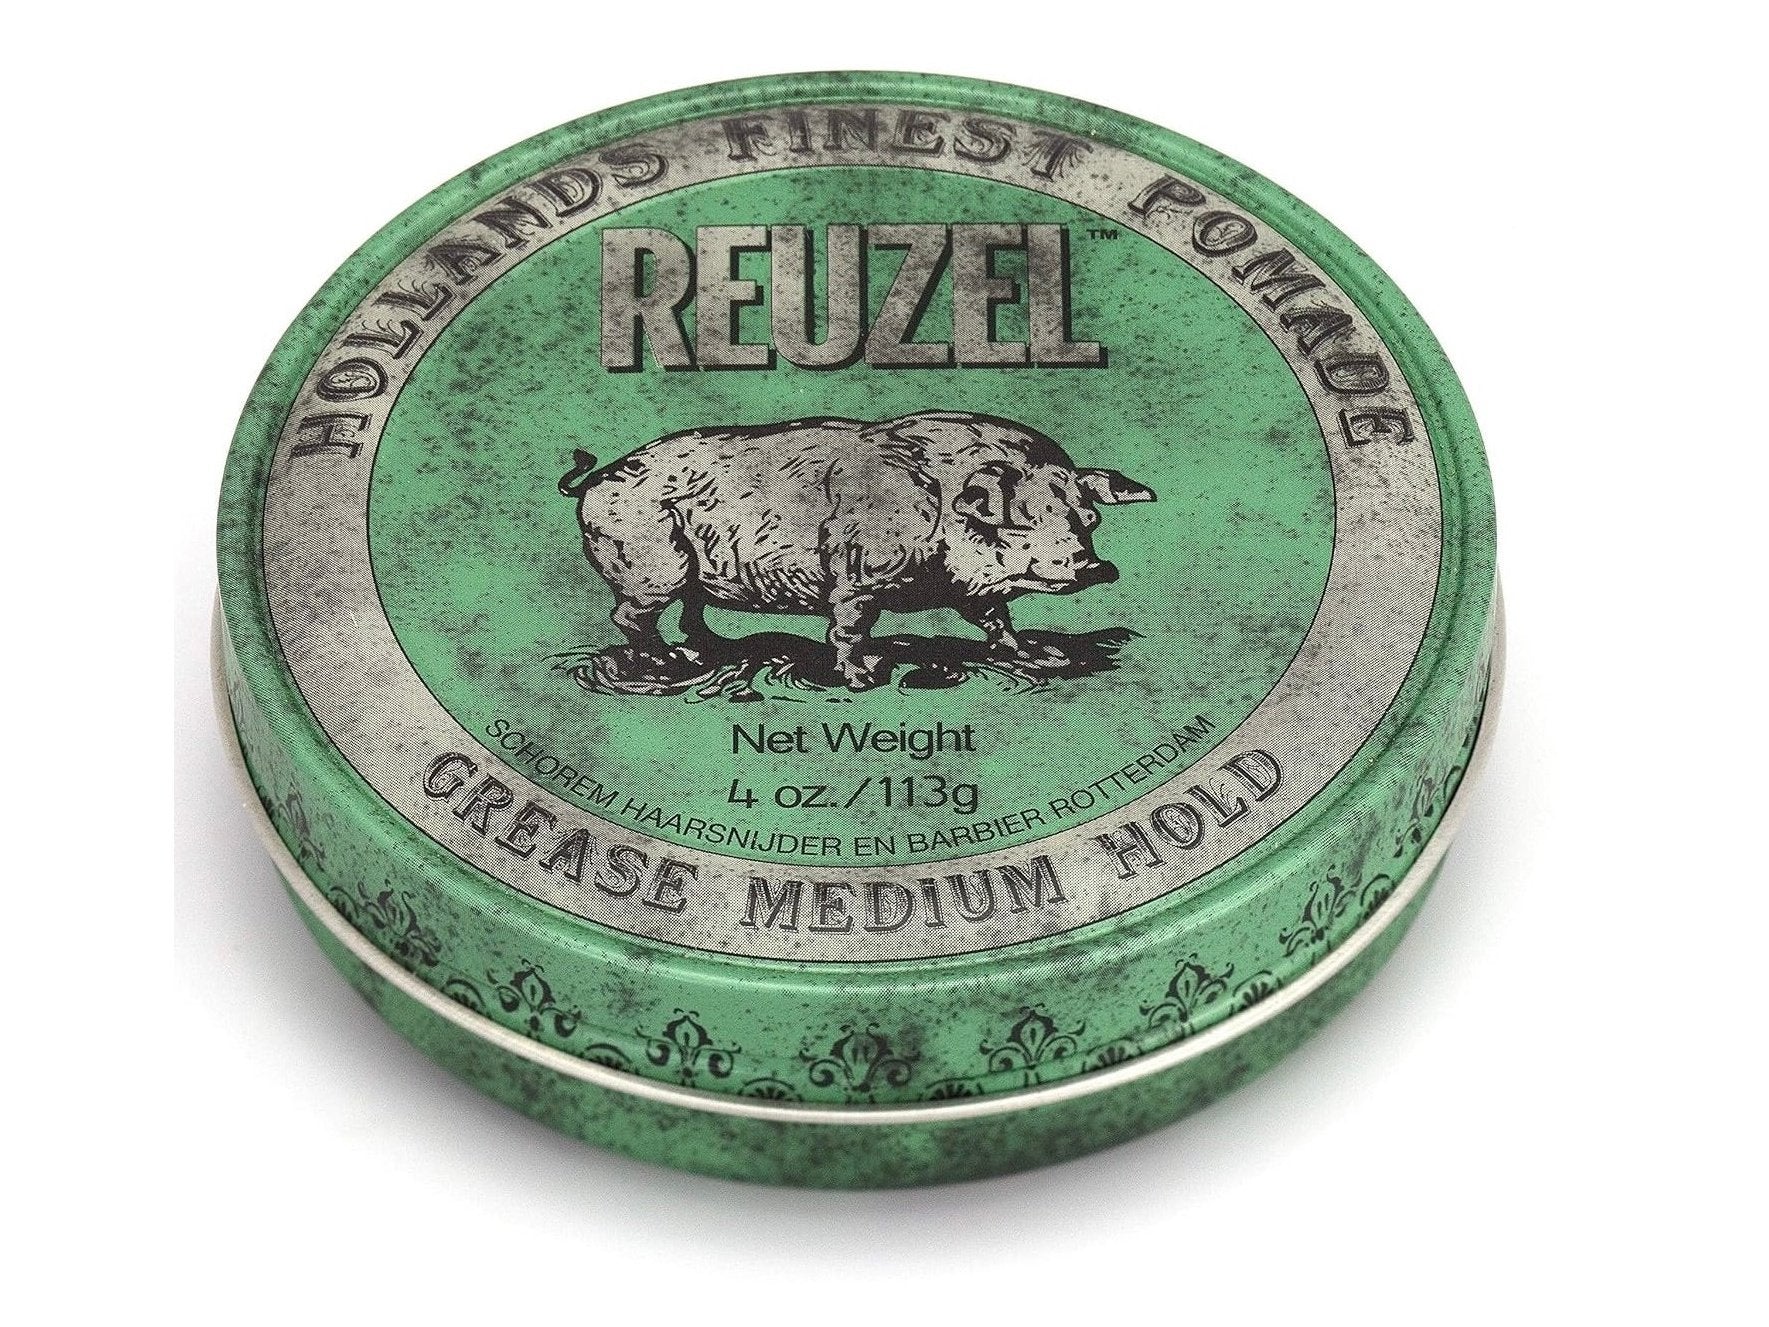 Load image into Gallery viewer, Reuzel Green Grease Pomade, 4 oz.
